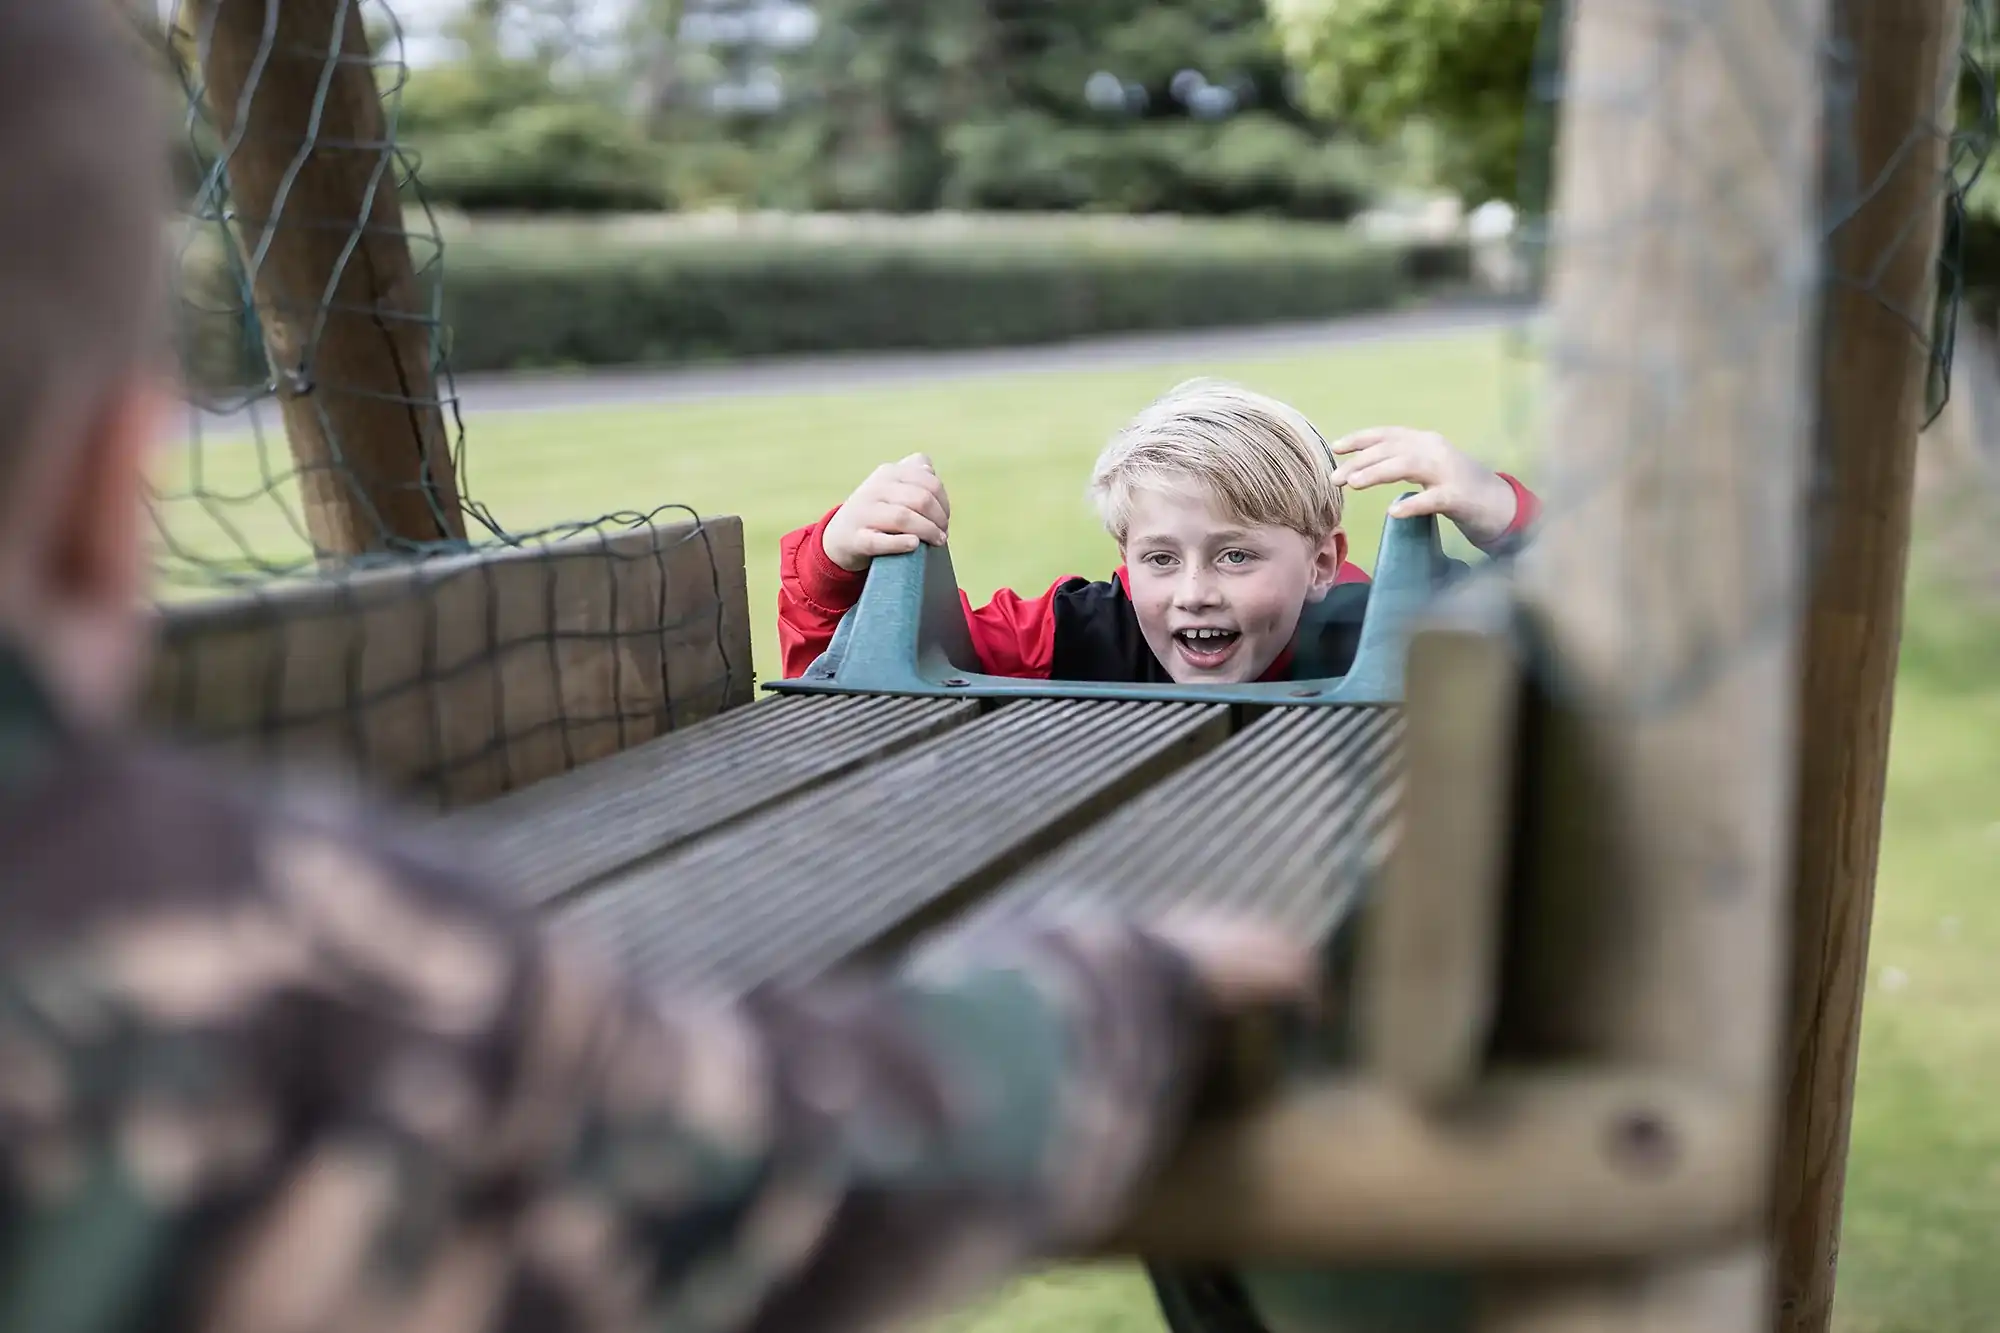 A child in a red jacket looks through a gap in a wooden play structure, with another child in camouflage clothing in the foreground.